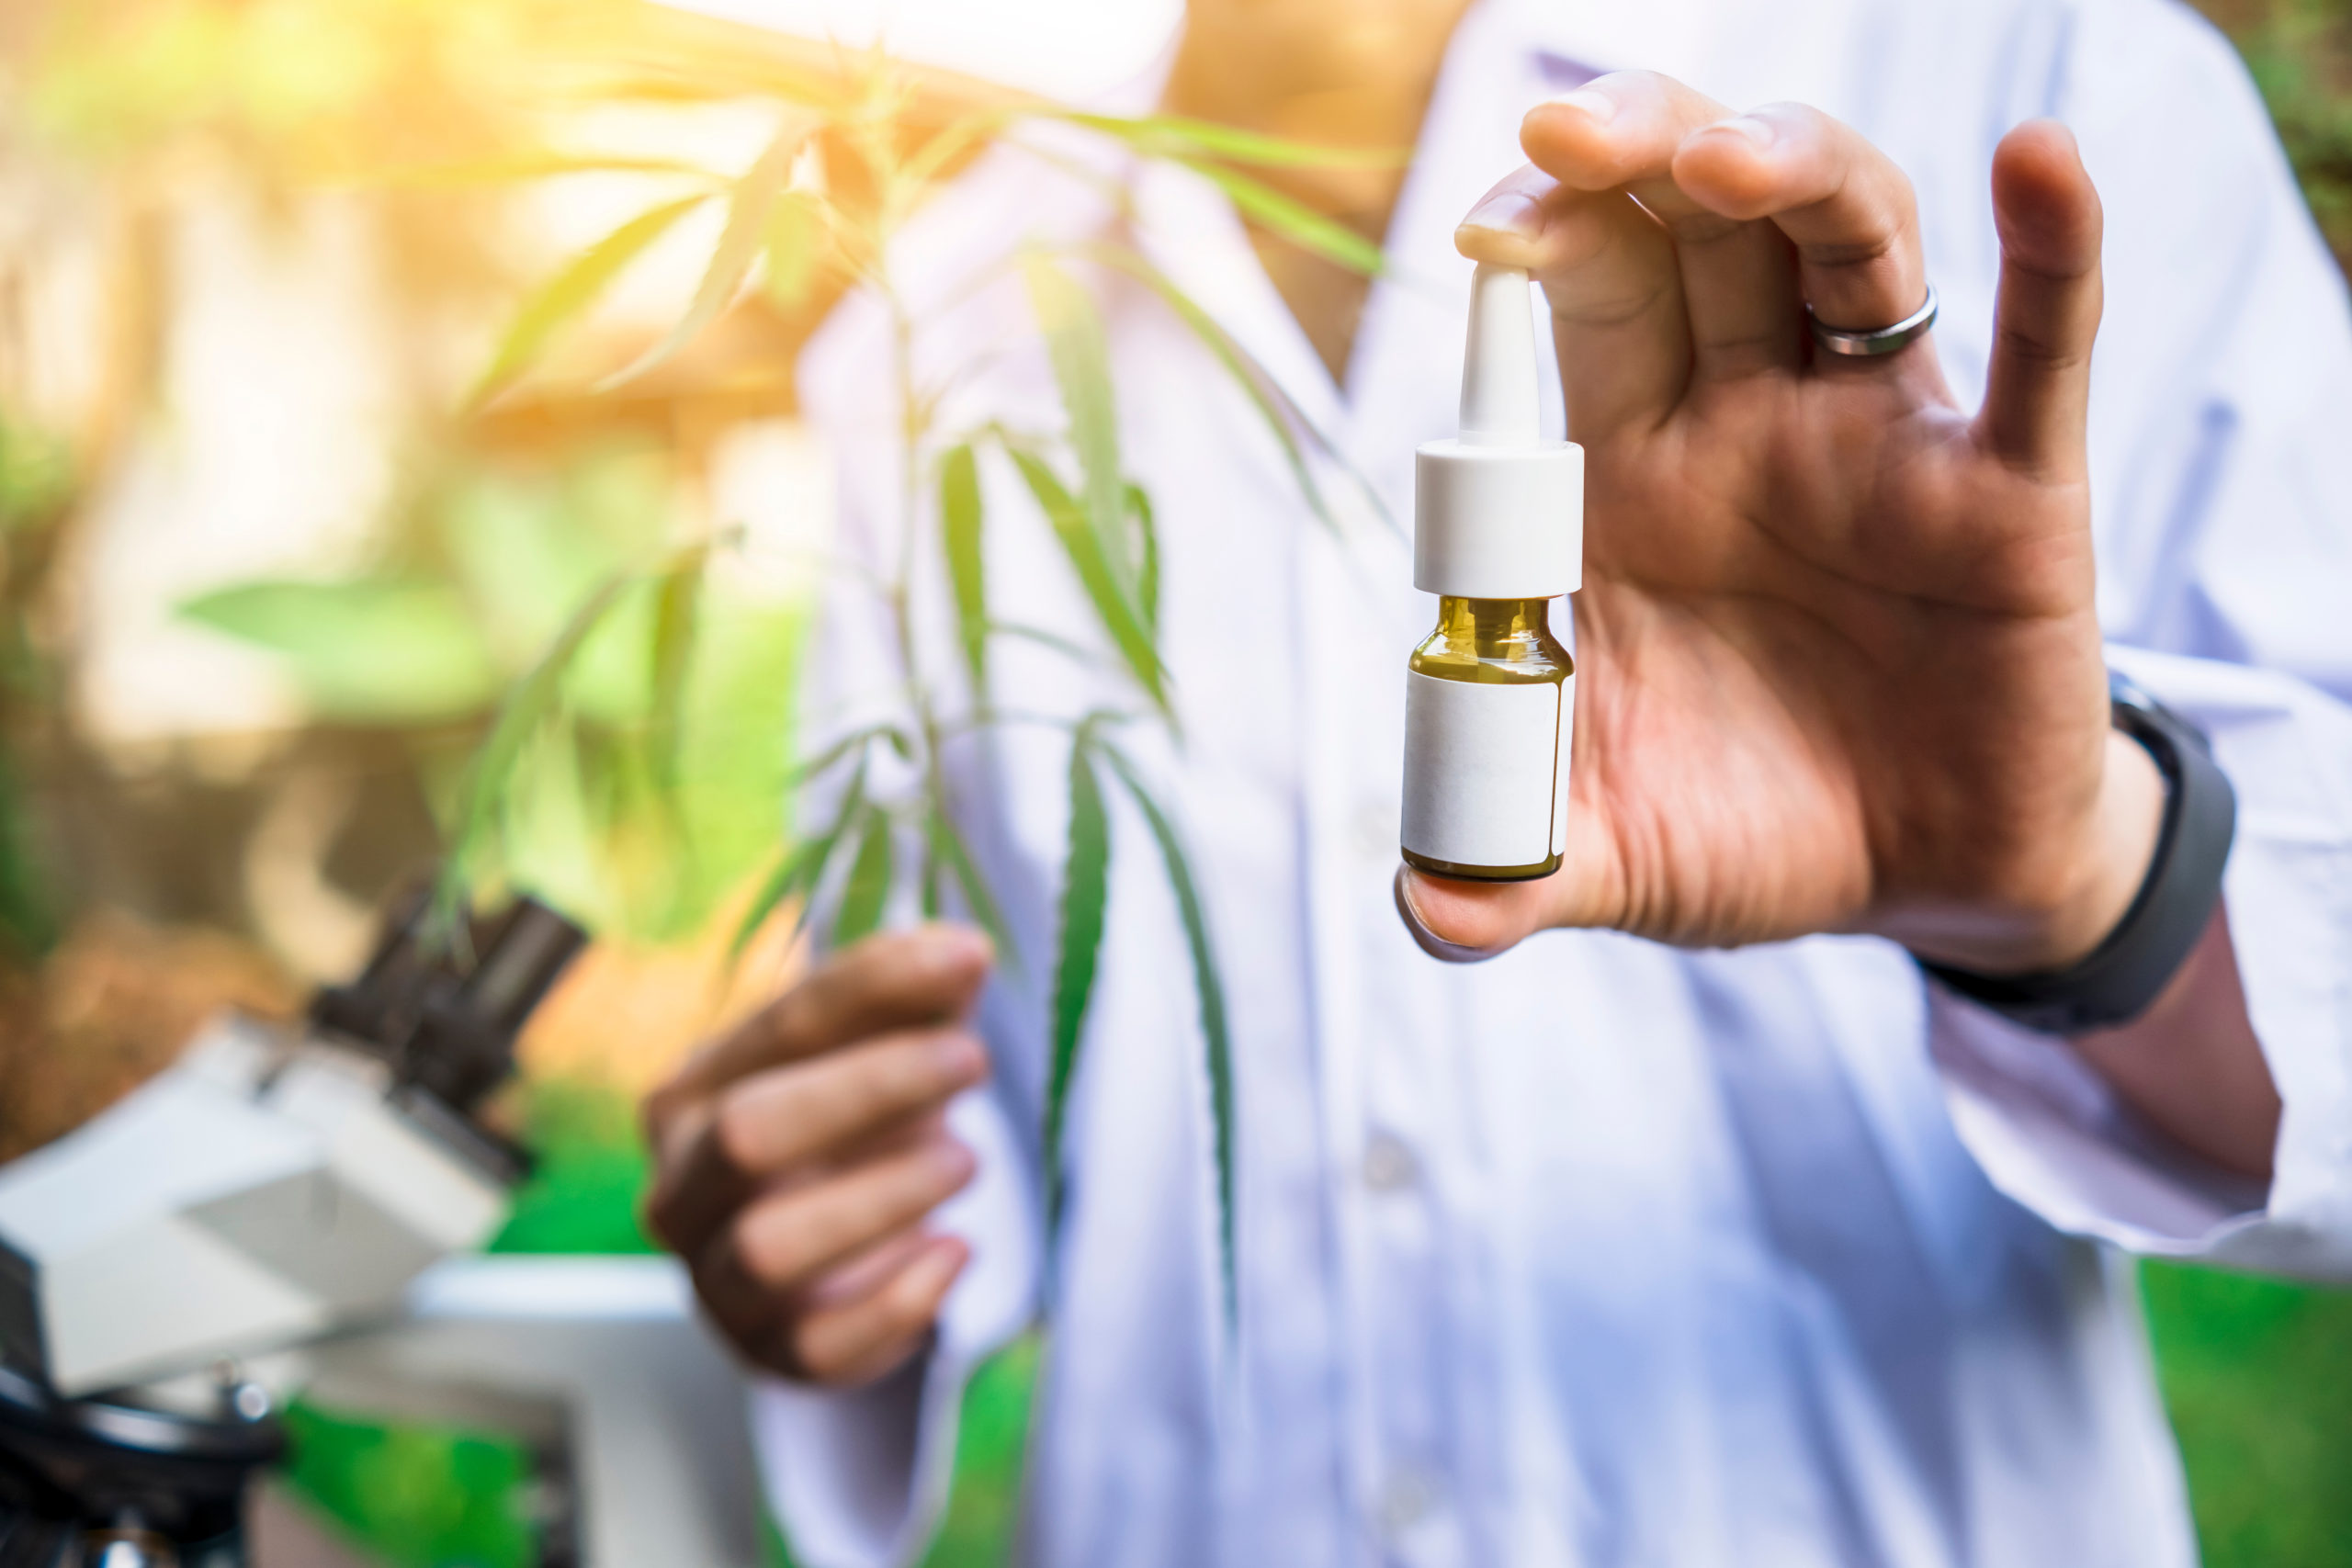 Scientist in lab coat near a pot plant and microscope holding a bottle of help oil towards in the foreground.